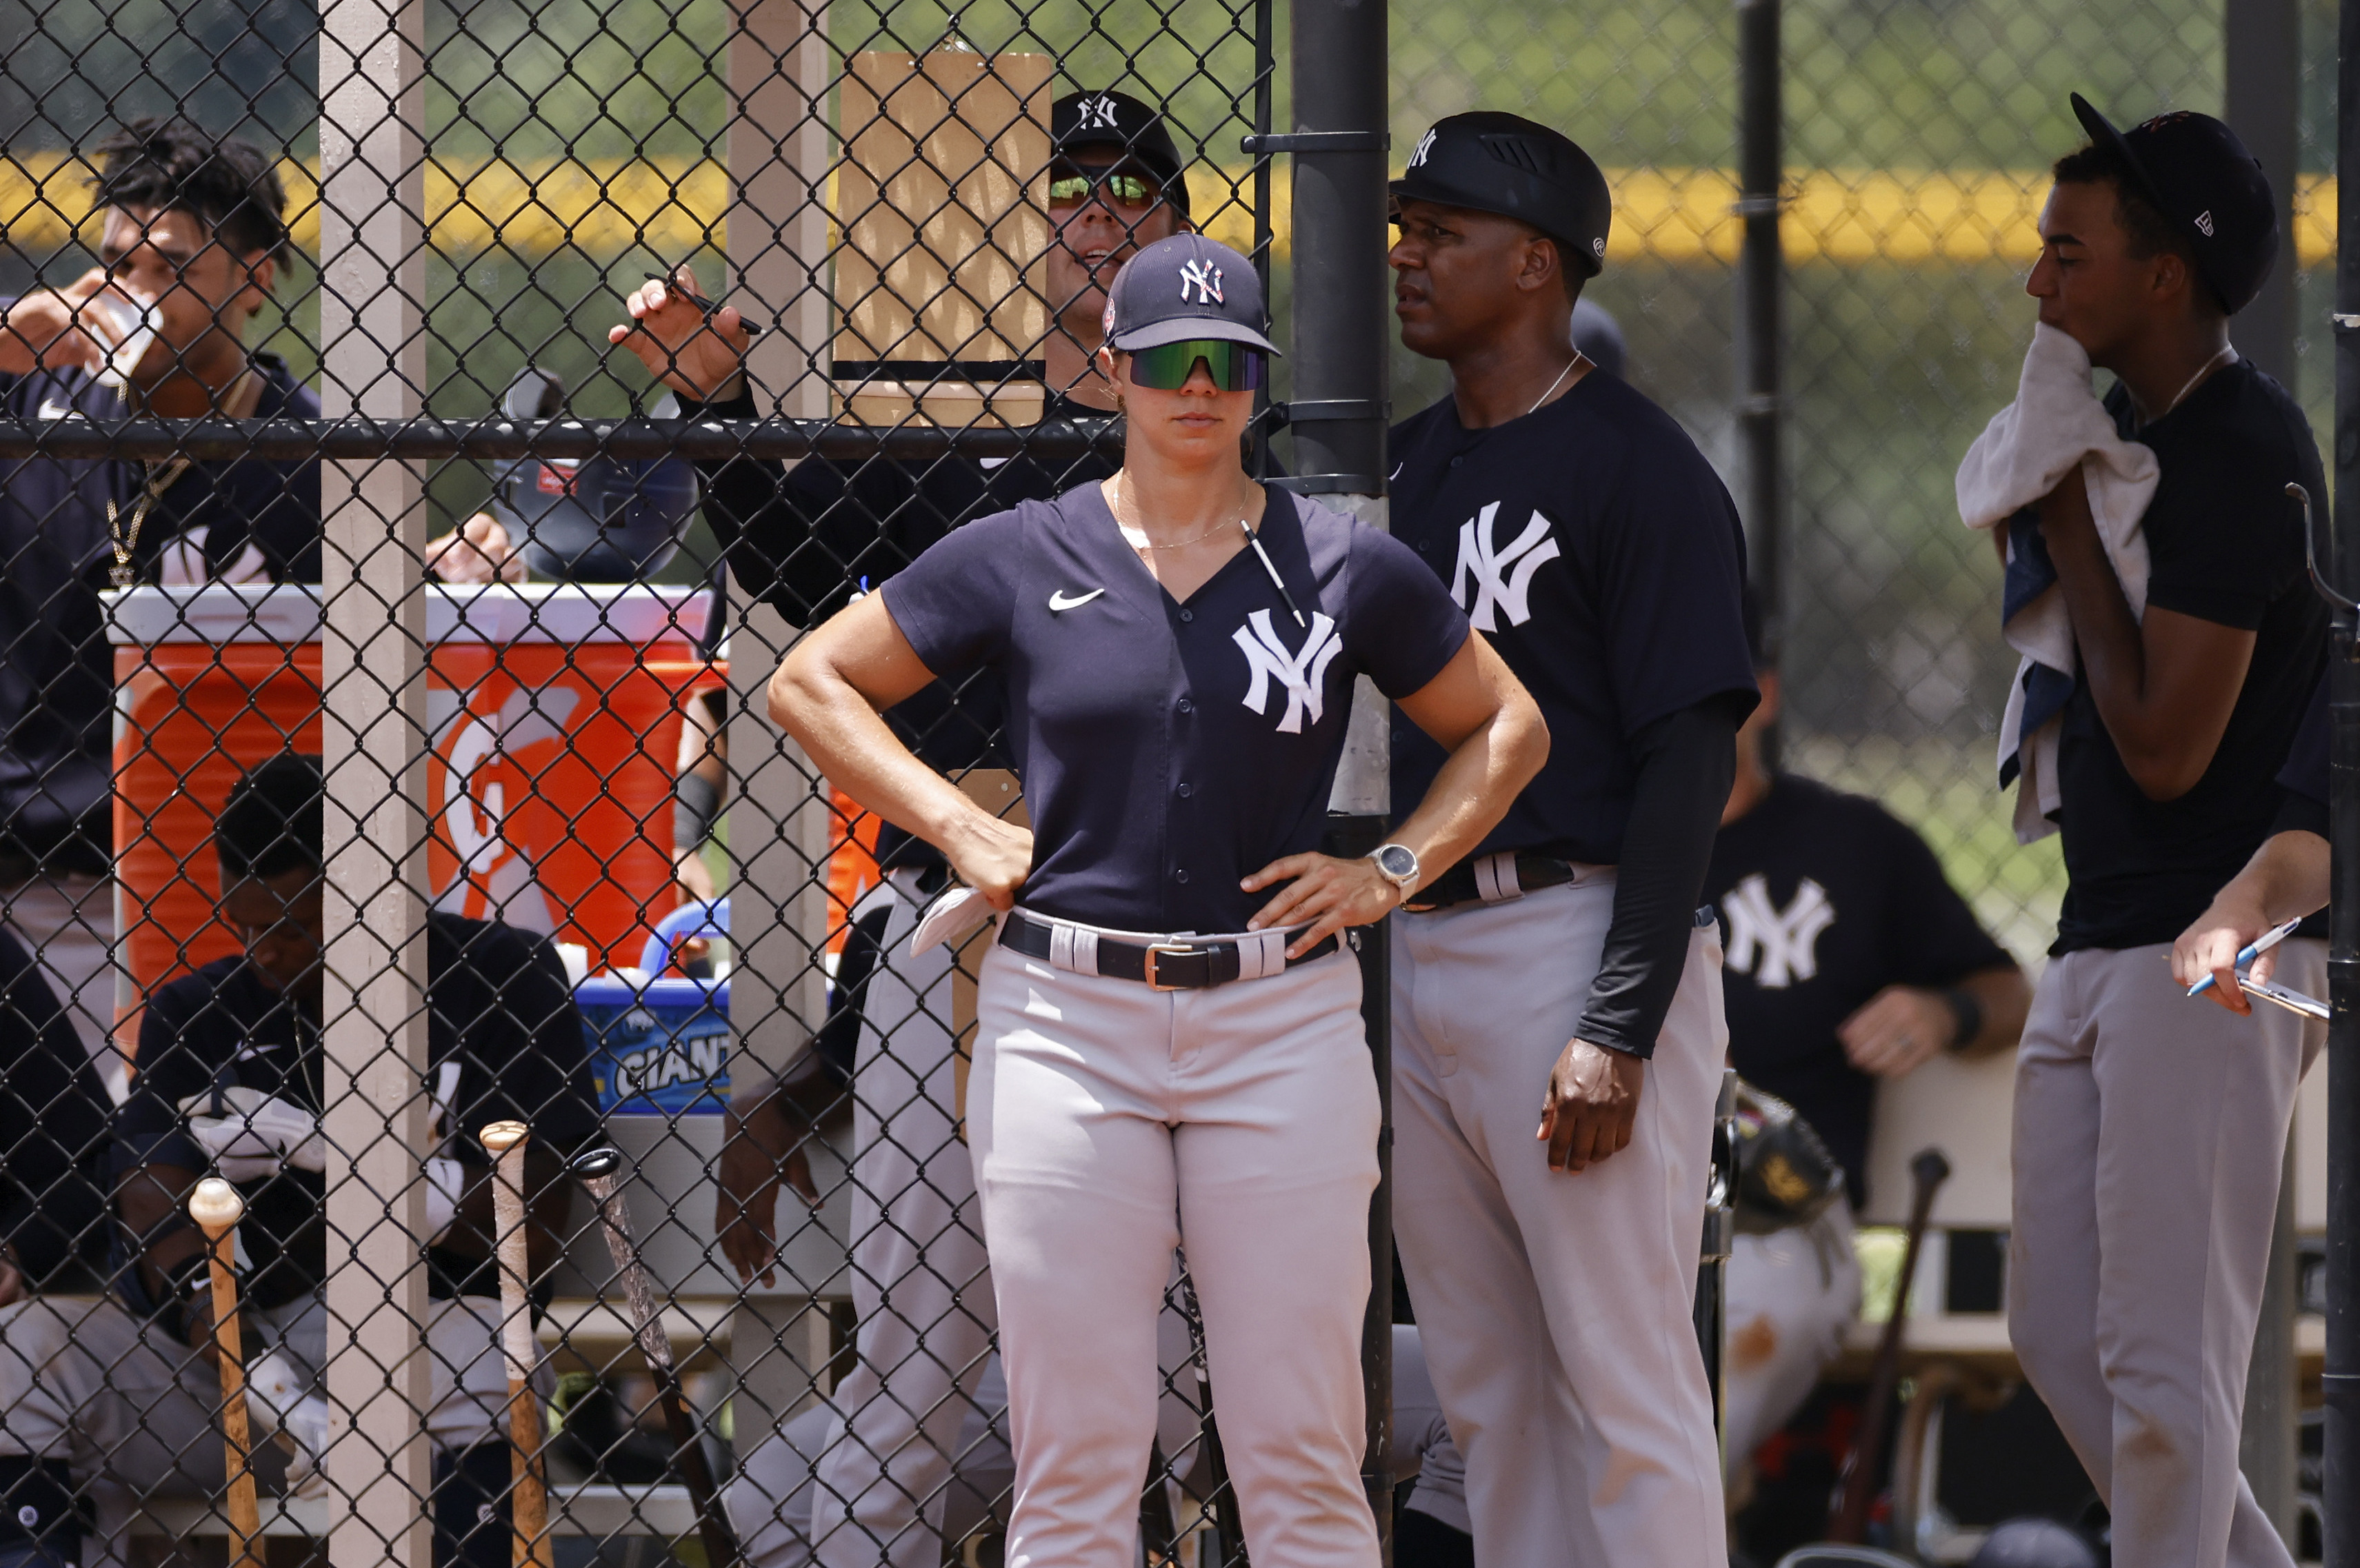 Report: Rachel Balkovec to Be 1st Female Minor League Manager for Yankees' Low-A Team